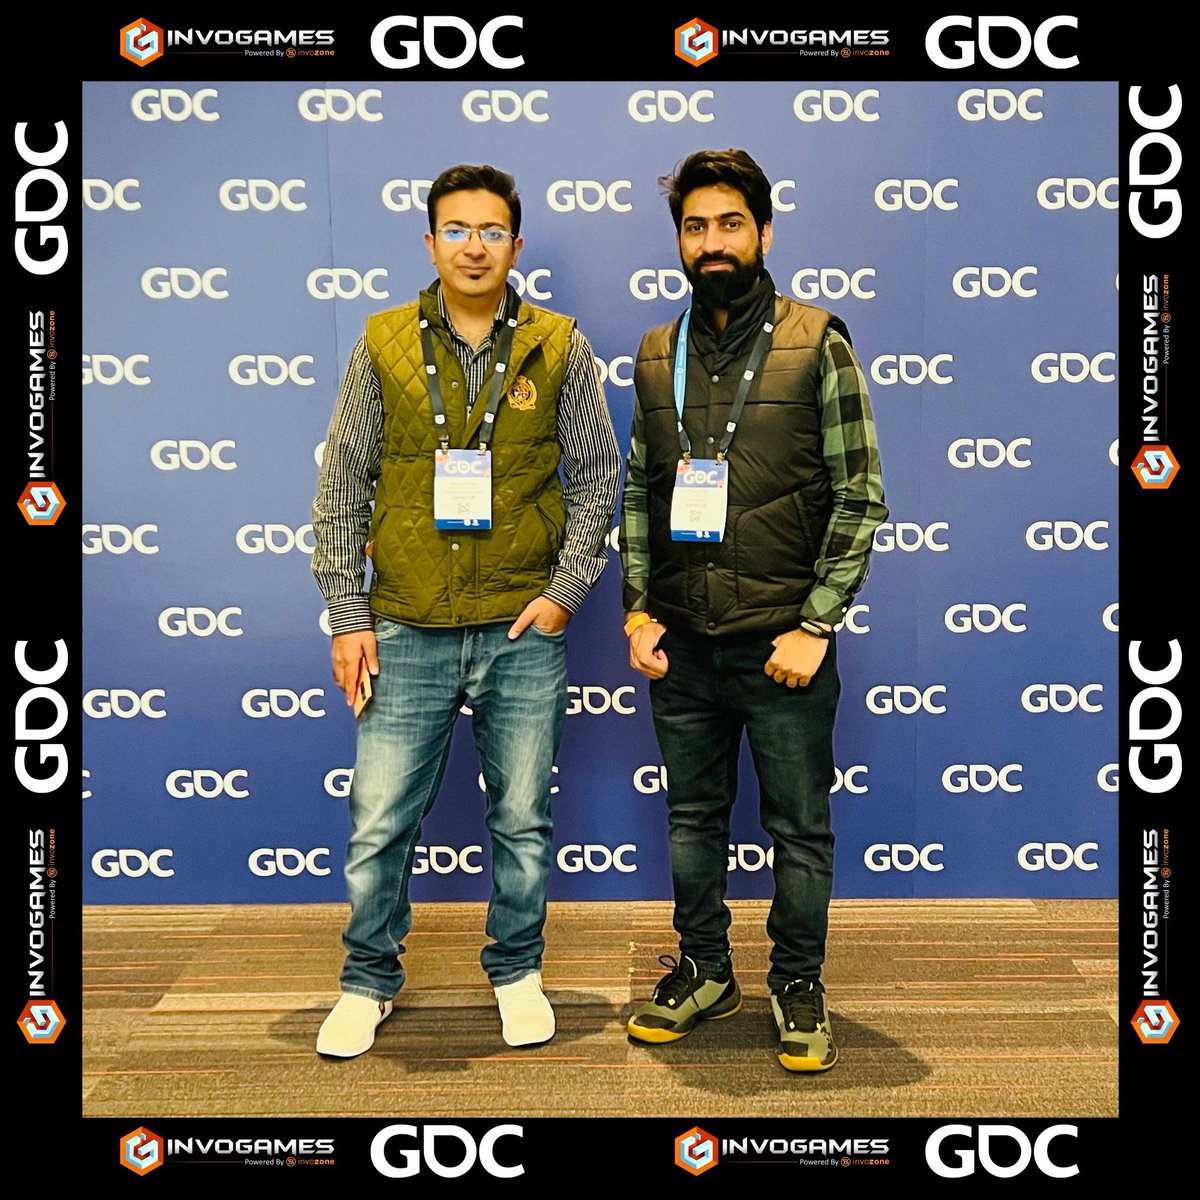 @chhnaveedulaziz @ItsFurqanAziz Hi Naveed! How can you be so proud of your CEO if he is a thief, stole our project #Cardano4speed 
I did post @Official_GDC  so hopefully people at conference recognize the “type” of CEO he is. Next time I take a flight to meet him in person,bunch of thieves #invozone #invogames